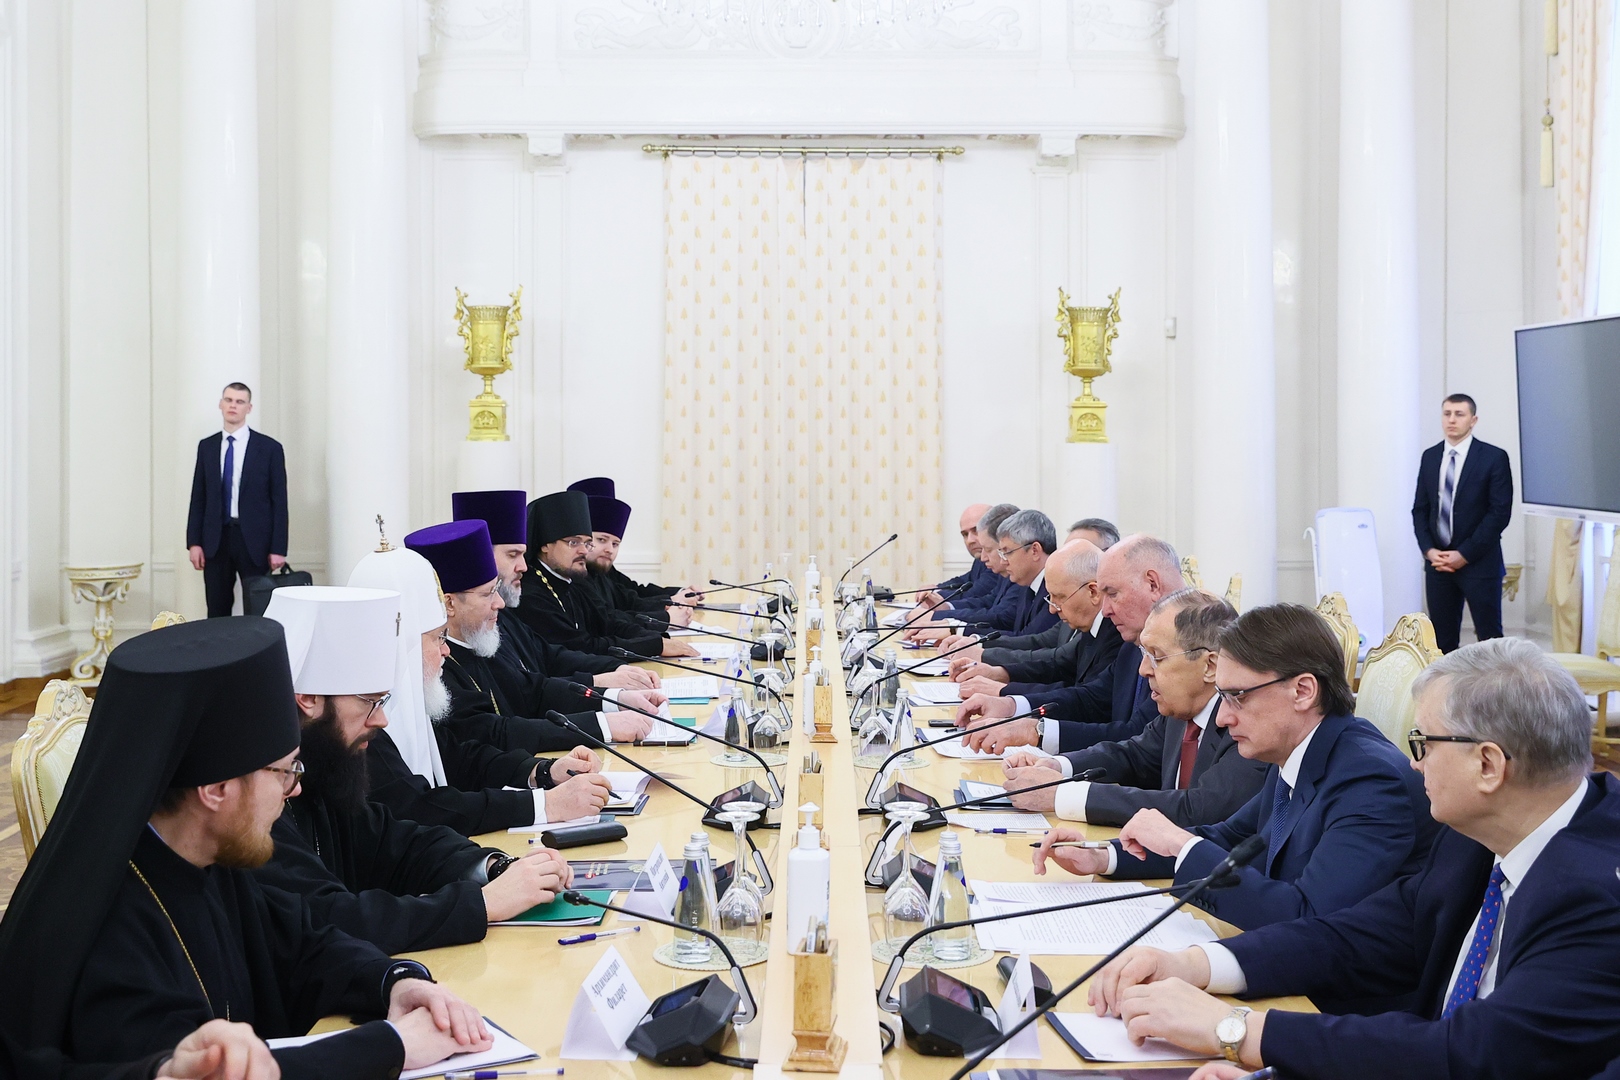 Church-State Partnership Strengthened: Patriarch Kirill and Foreign Minister Lavrov Lead Joint Working Group Meeting